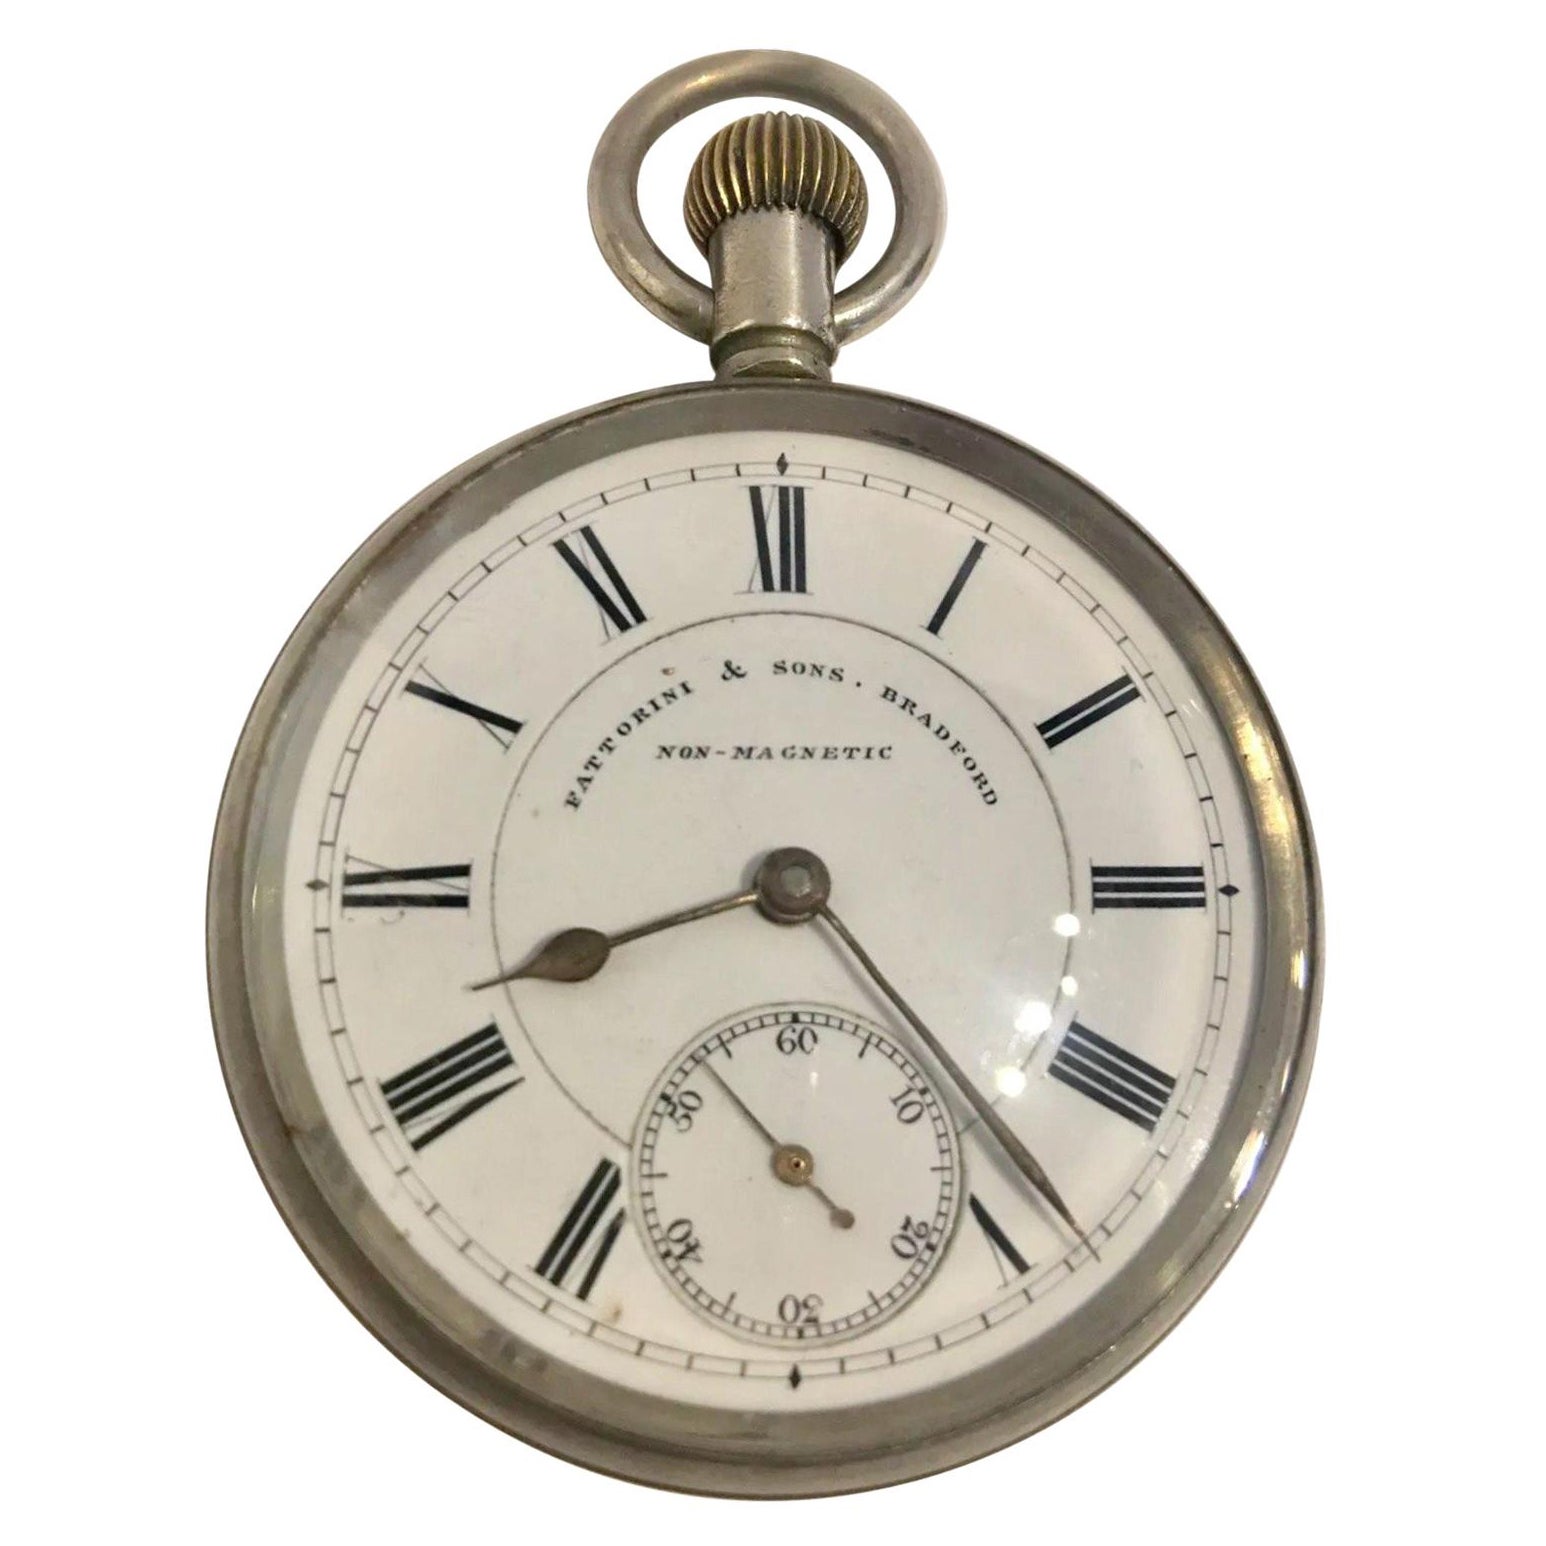 Antique Waltham Mass Pocket Watch Signed Fattorini & Sons, Bradford Non Magnetic For Sale